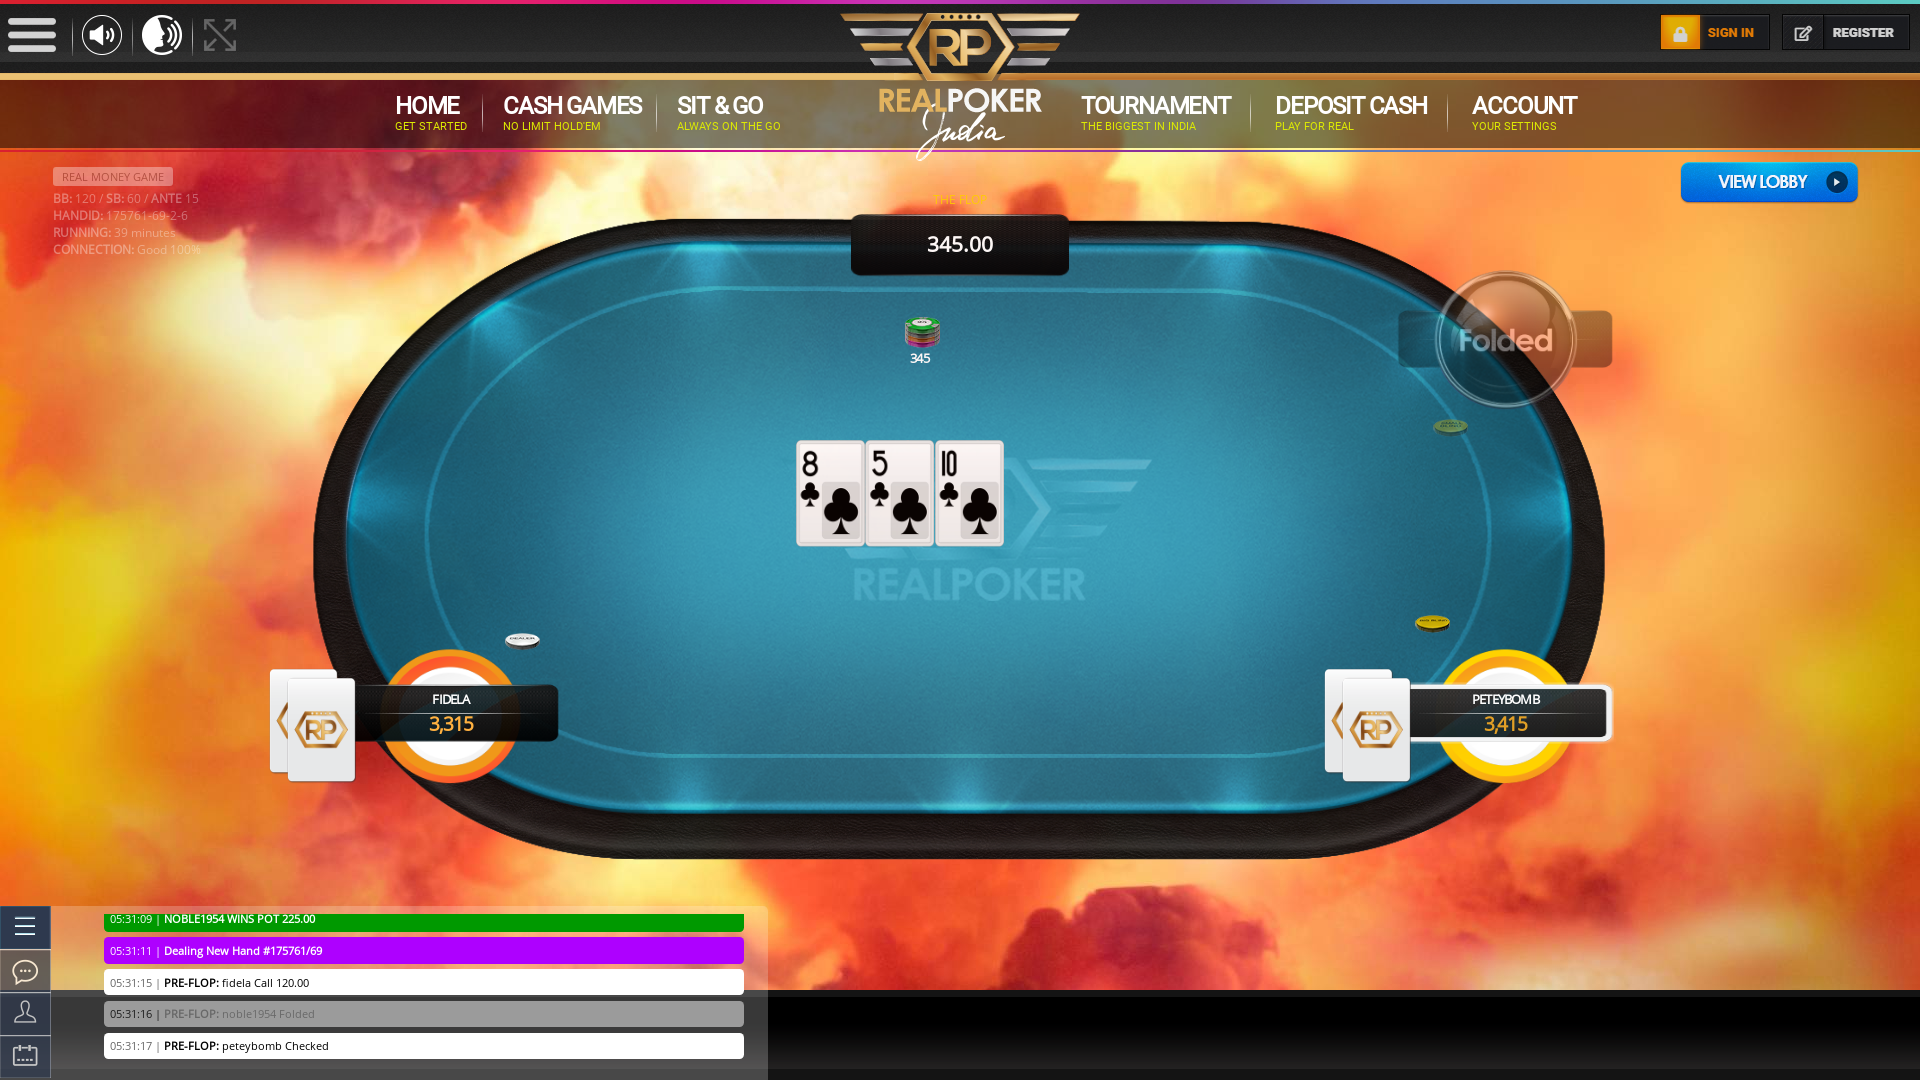 Online poker on a 10 player table in the 39th minute match up